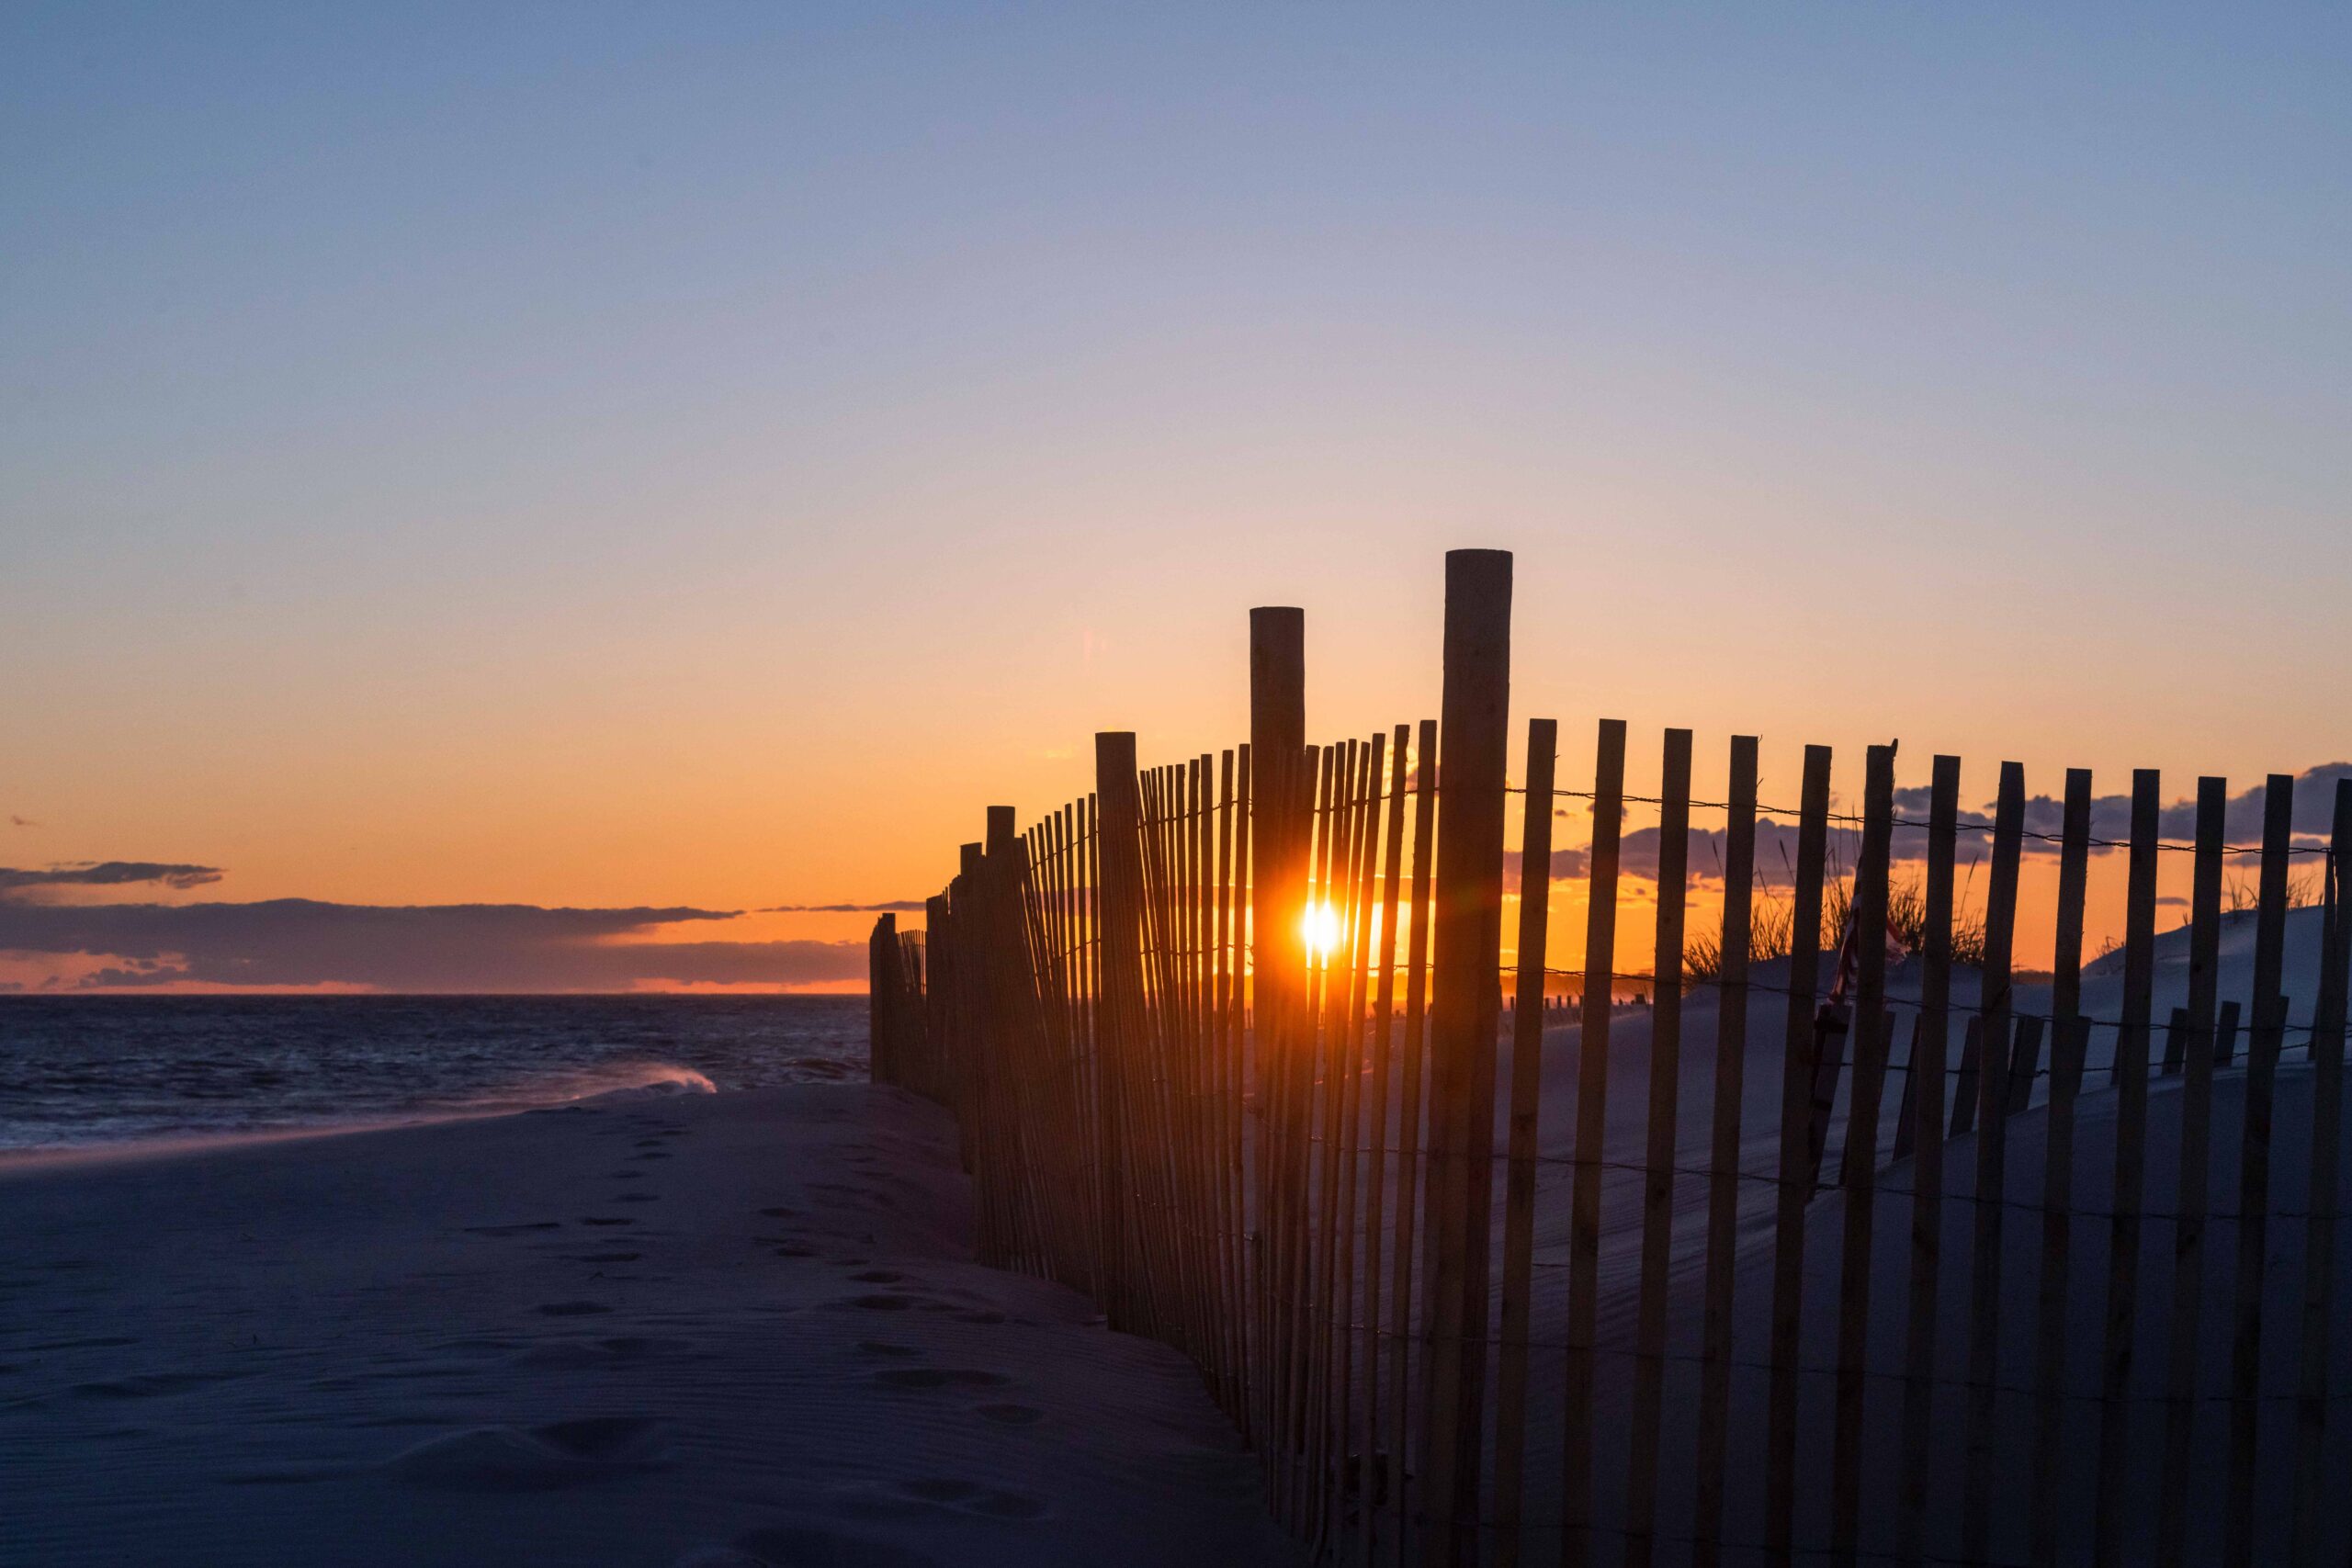 Sunset through a beach fence with a clear sky and the ocean in the background